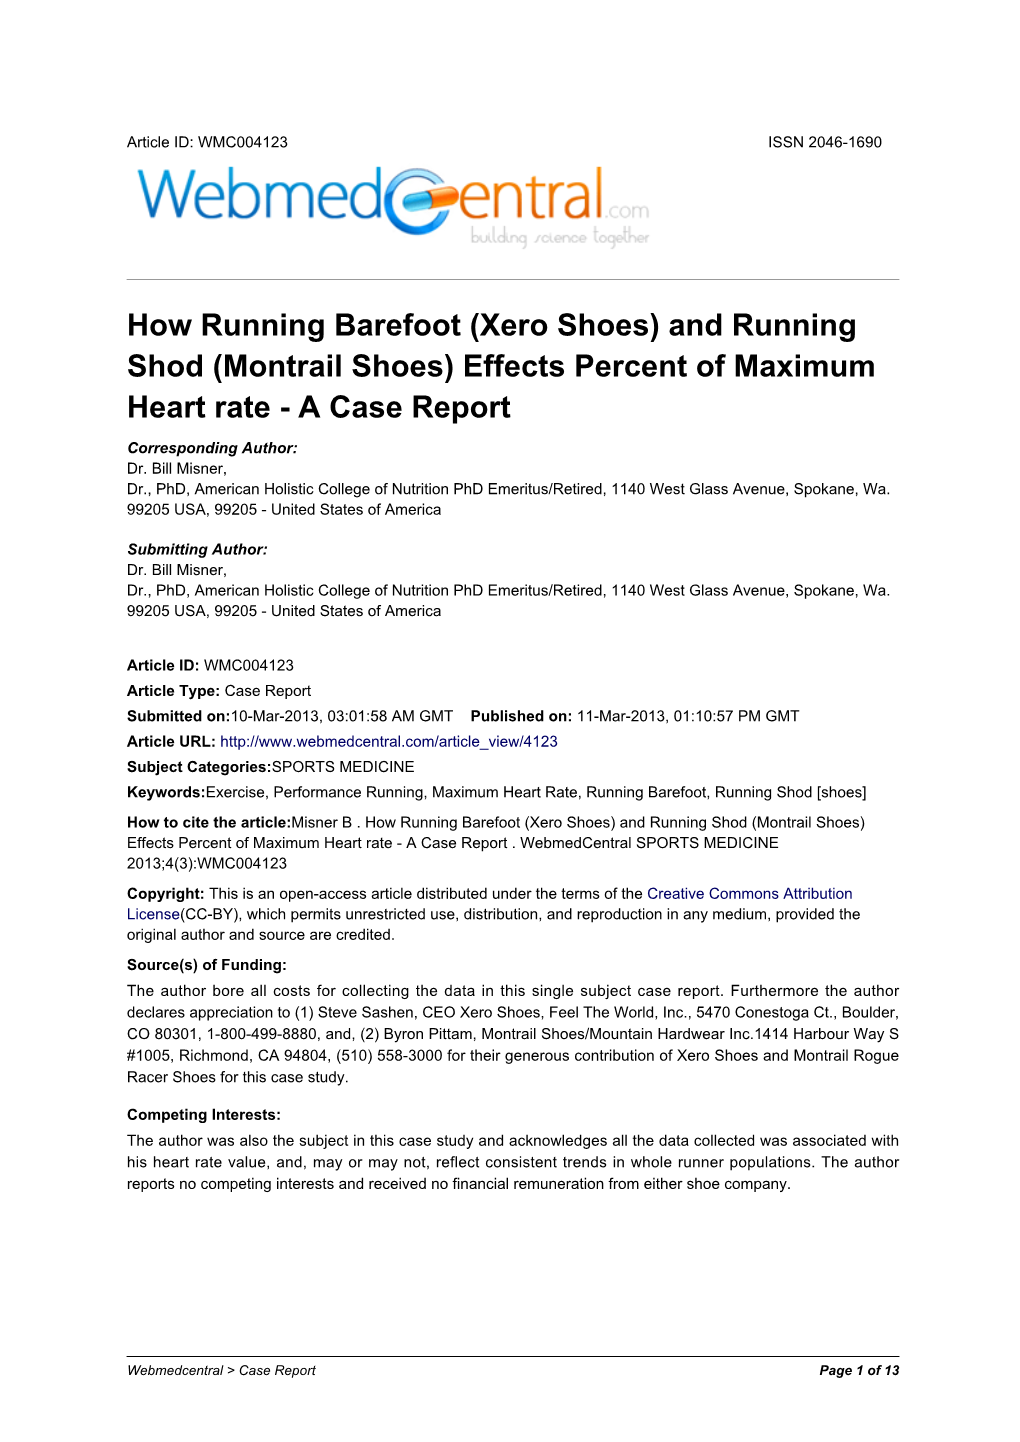 Xero Shoes) and Running Shod (Montrail Shoes) Effects Percent of Maximum Heart Rate - a Case Report